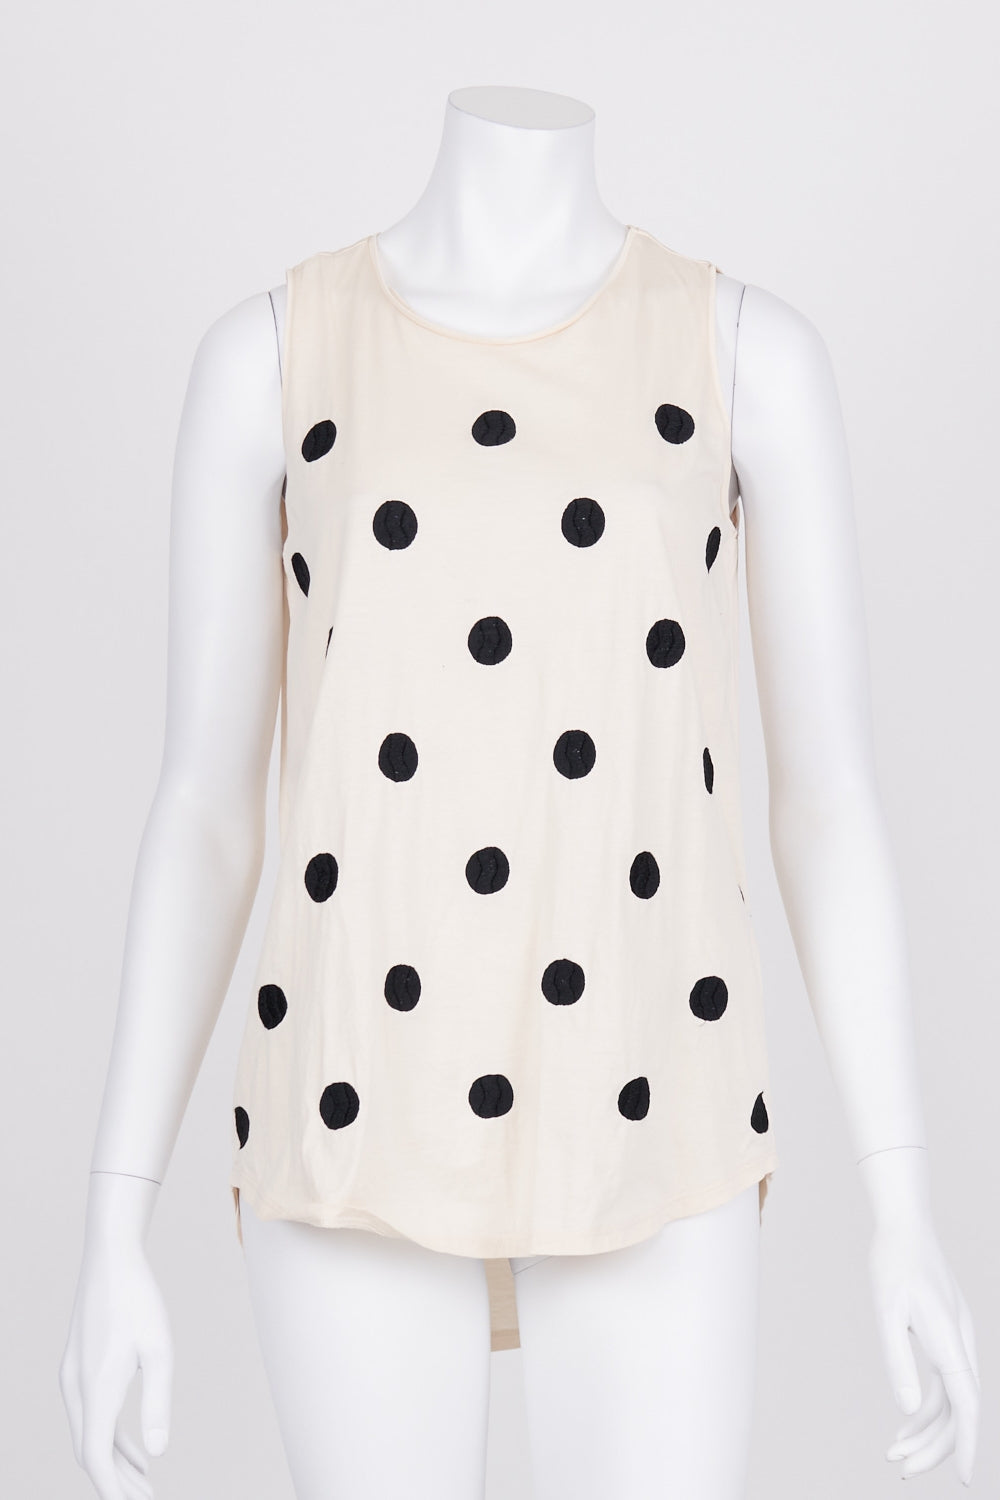 Country Road Polka Dot Pattern Front Sleeveless Top S